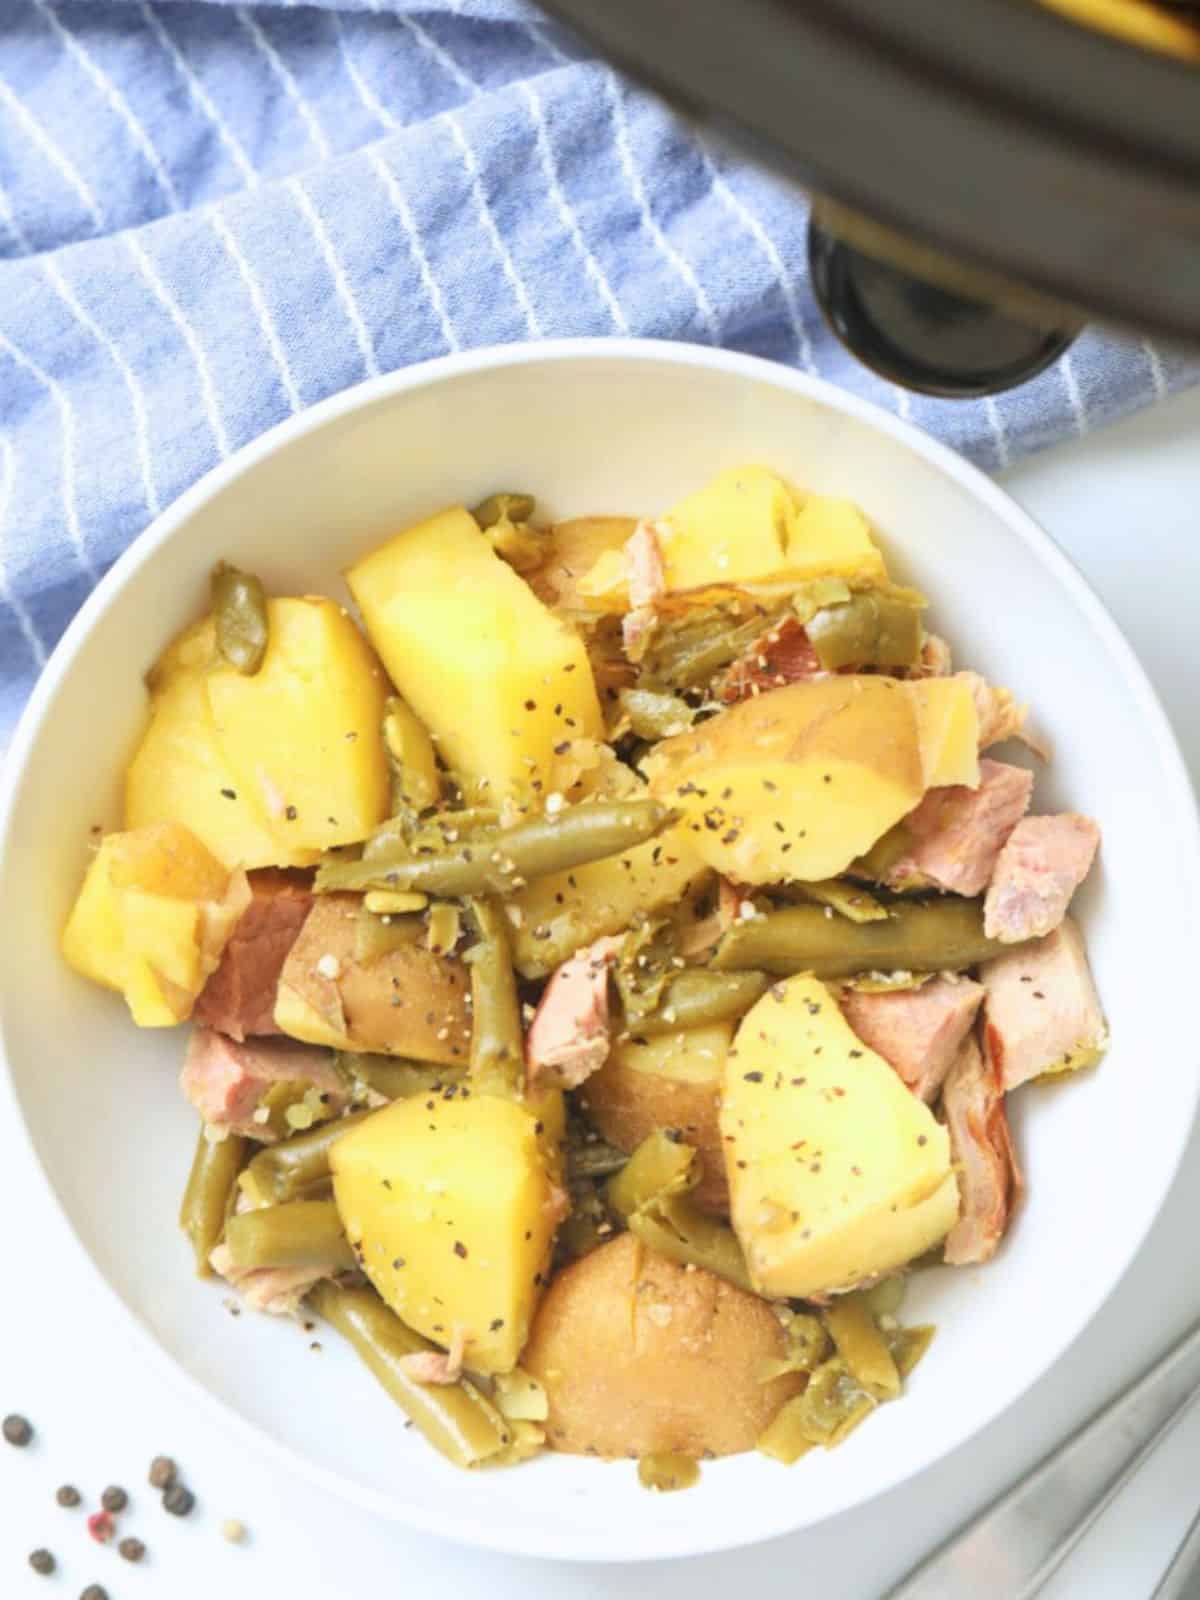 Bowl of potatoes with diced ham and green beans next to crockpot.